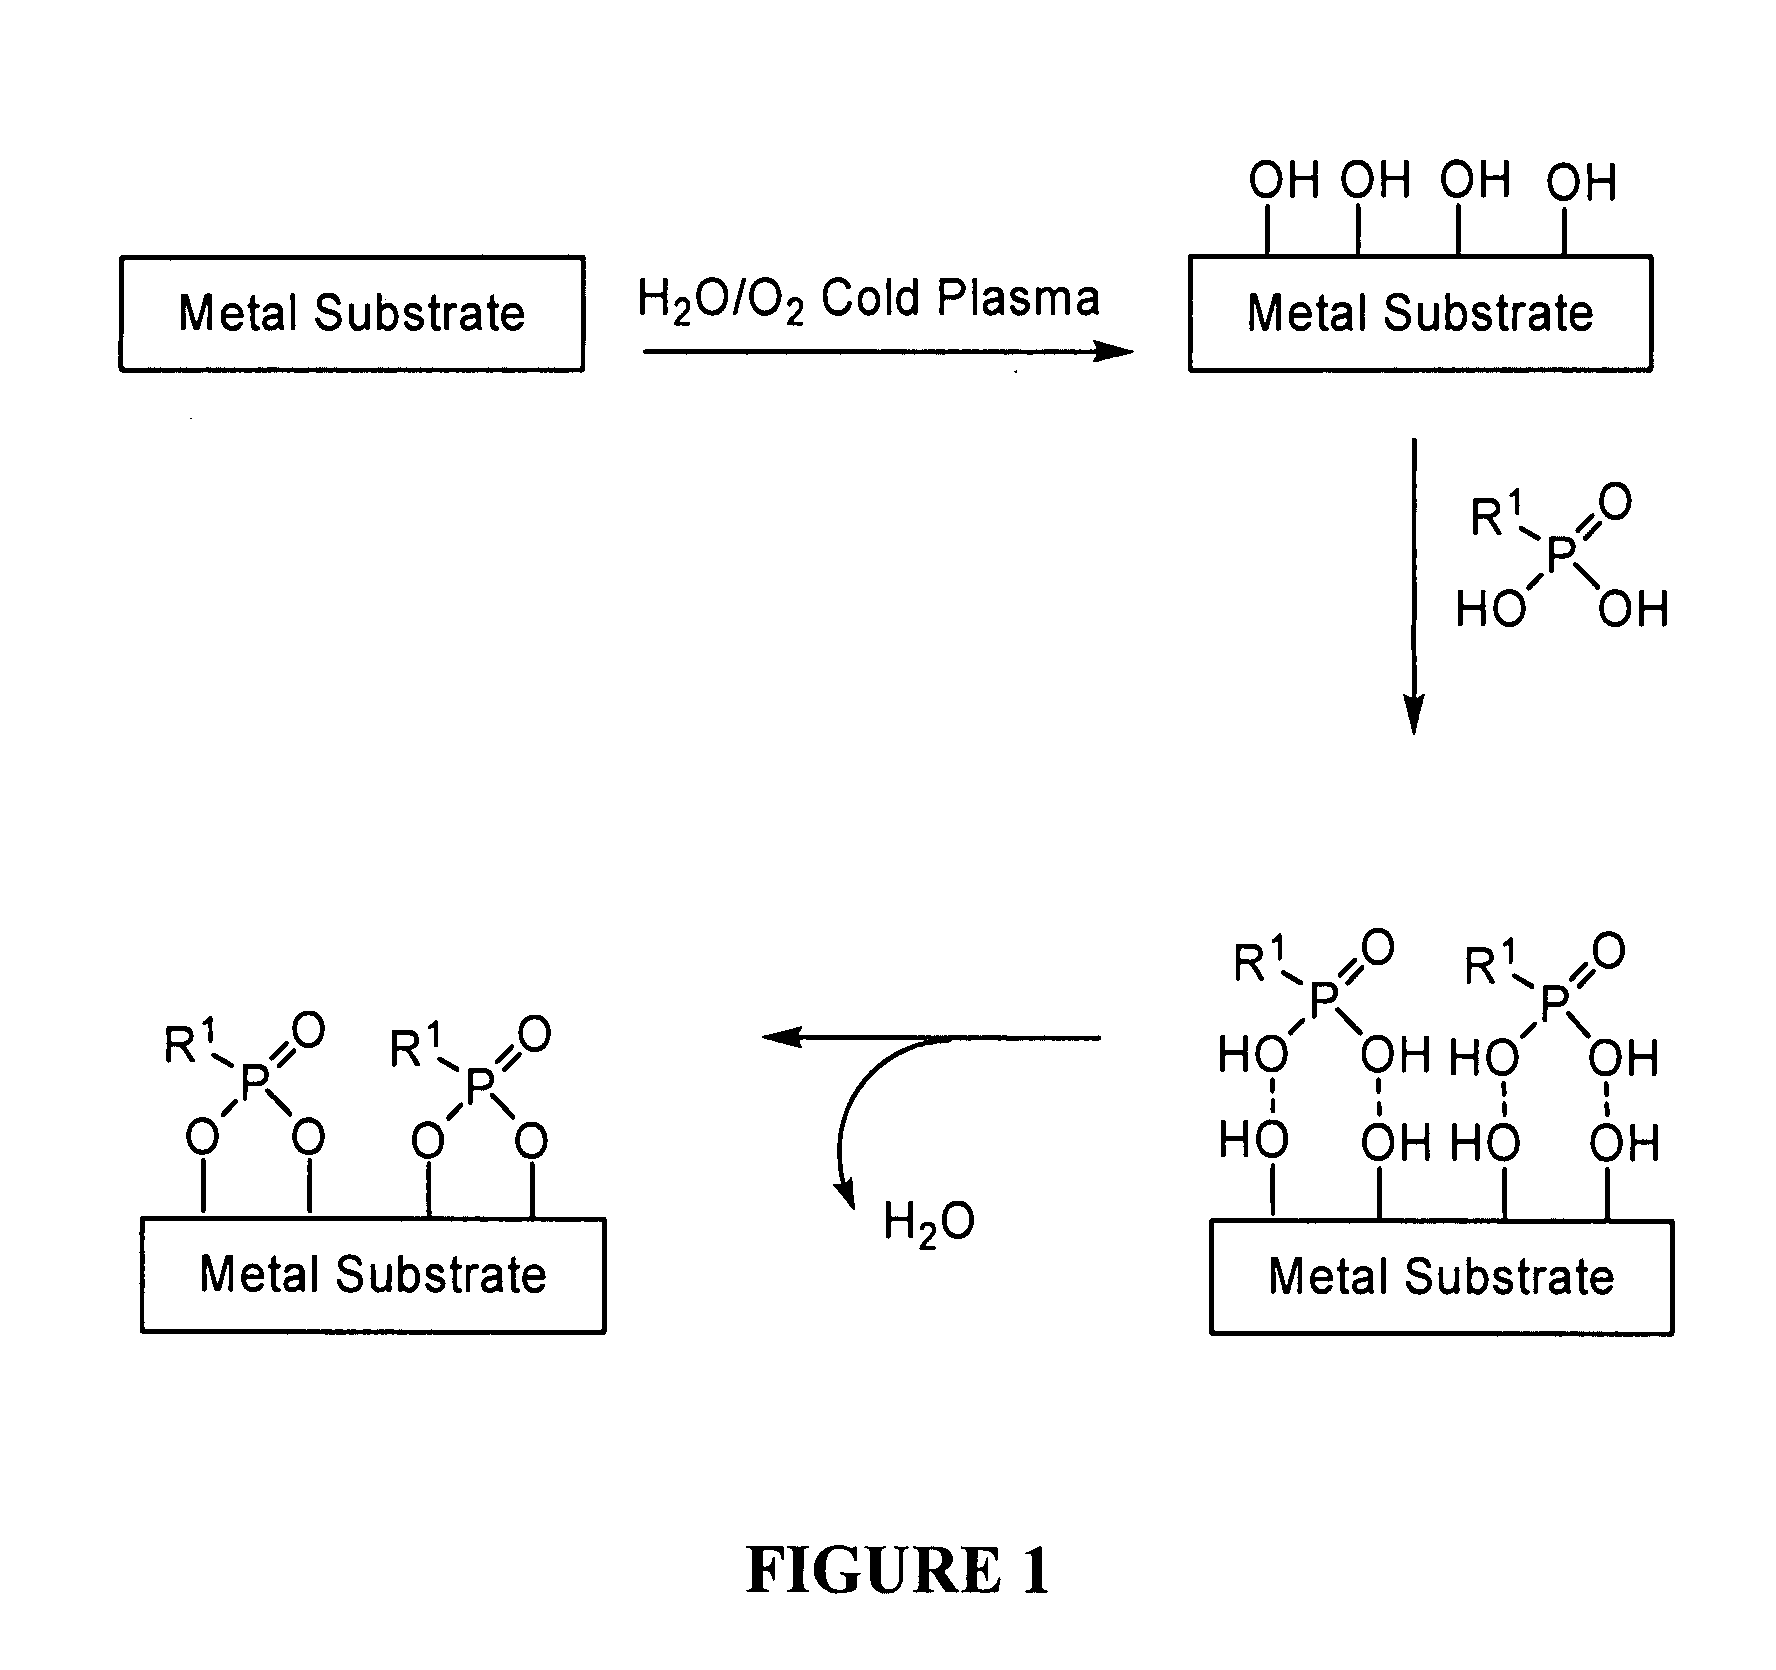 Covalent modification of metal surfaces